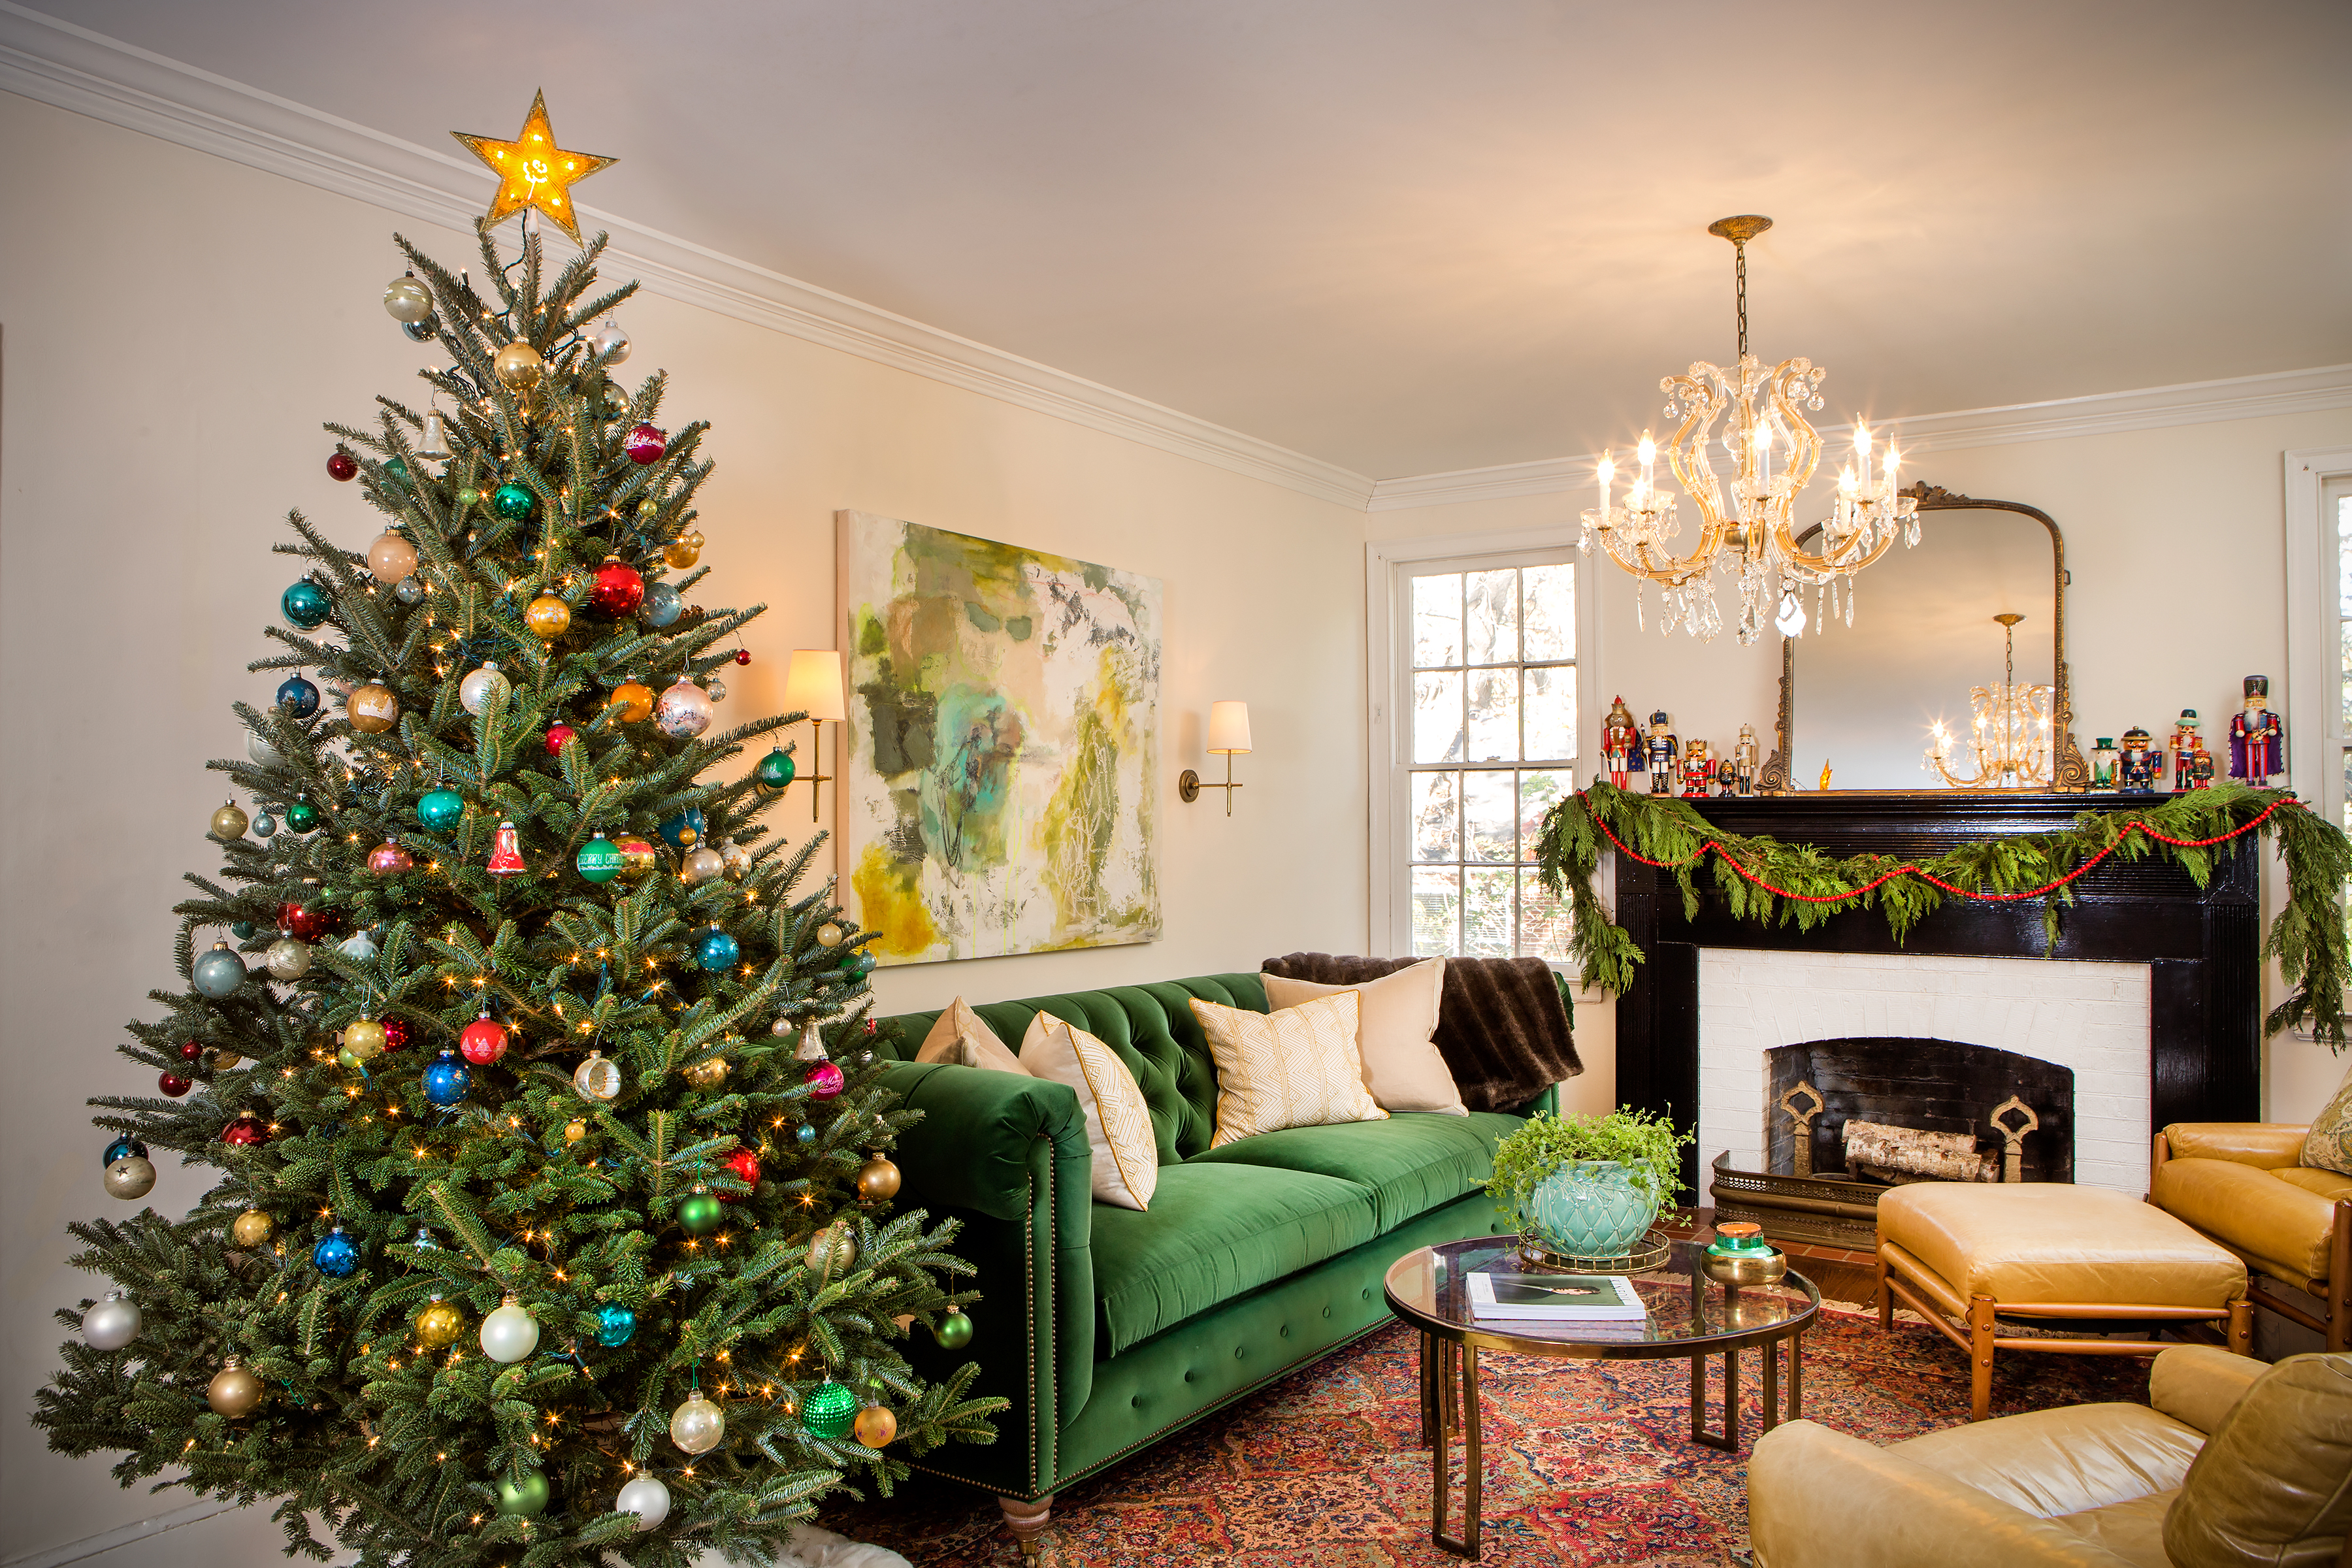 The Rourkes’ cottage living room breathes the scent of Christmas with a fresh cut Fraser fir from a local farm. The mantel is decorated with Leyland cypress garland woven with red beaded swags and nutcrackers from an estate sale. A glittering chandelier was a gift from Jessica’s mother, and a painting by local artist Miles Purvis Daniel was commissioned for the charming and sophisticated space.
